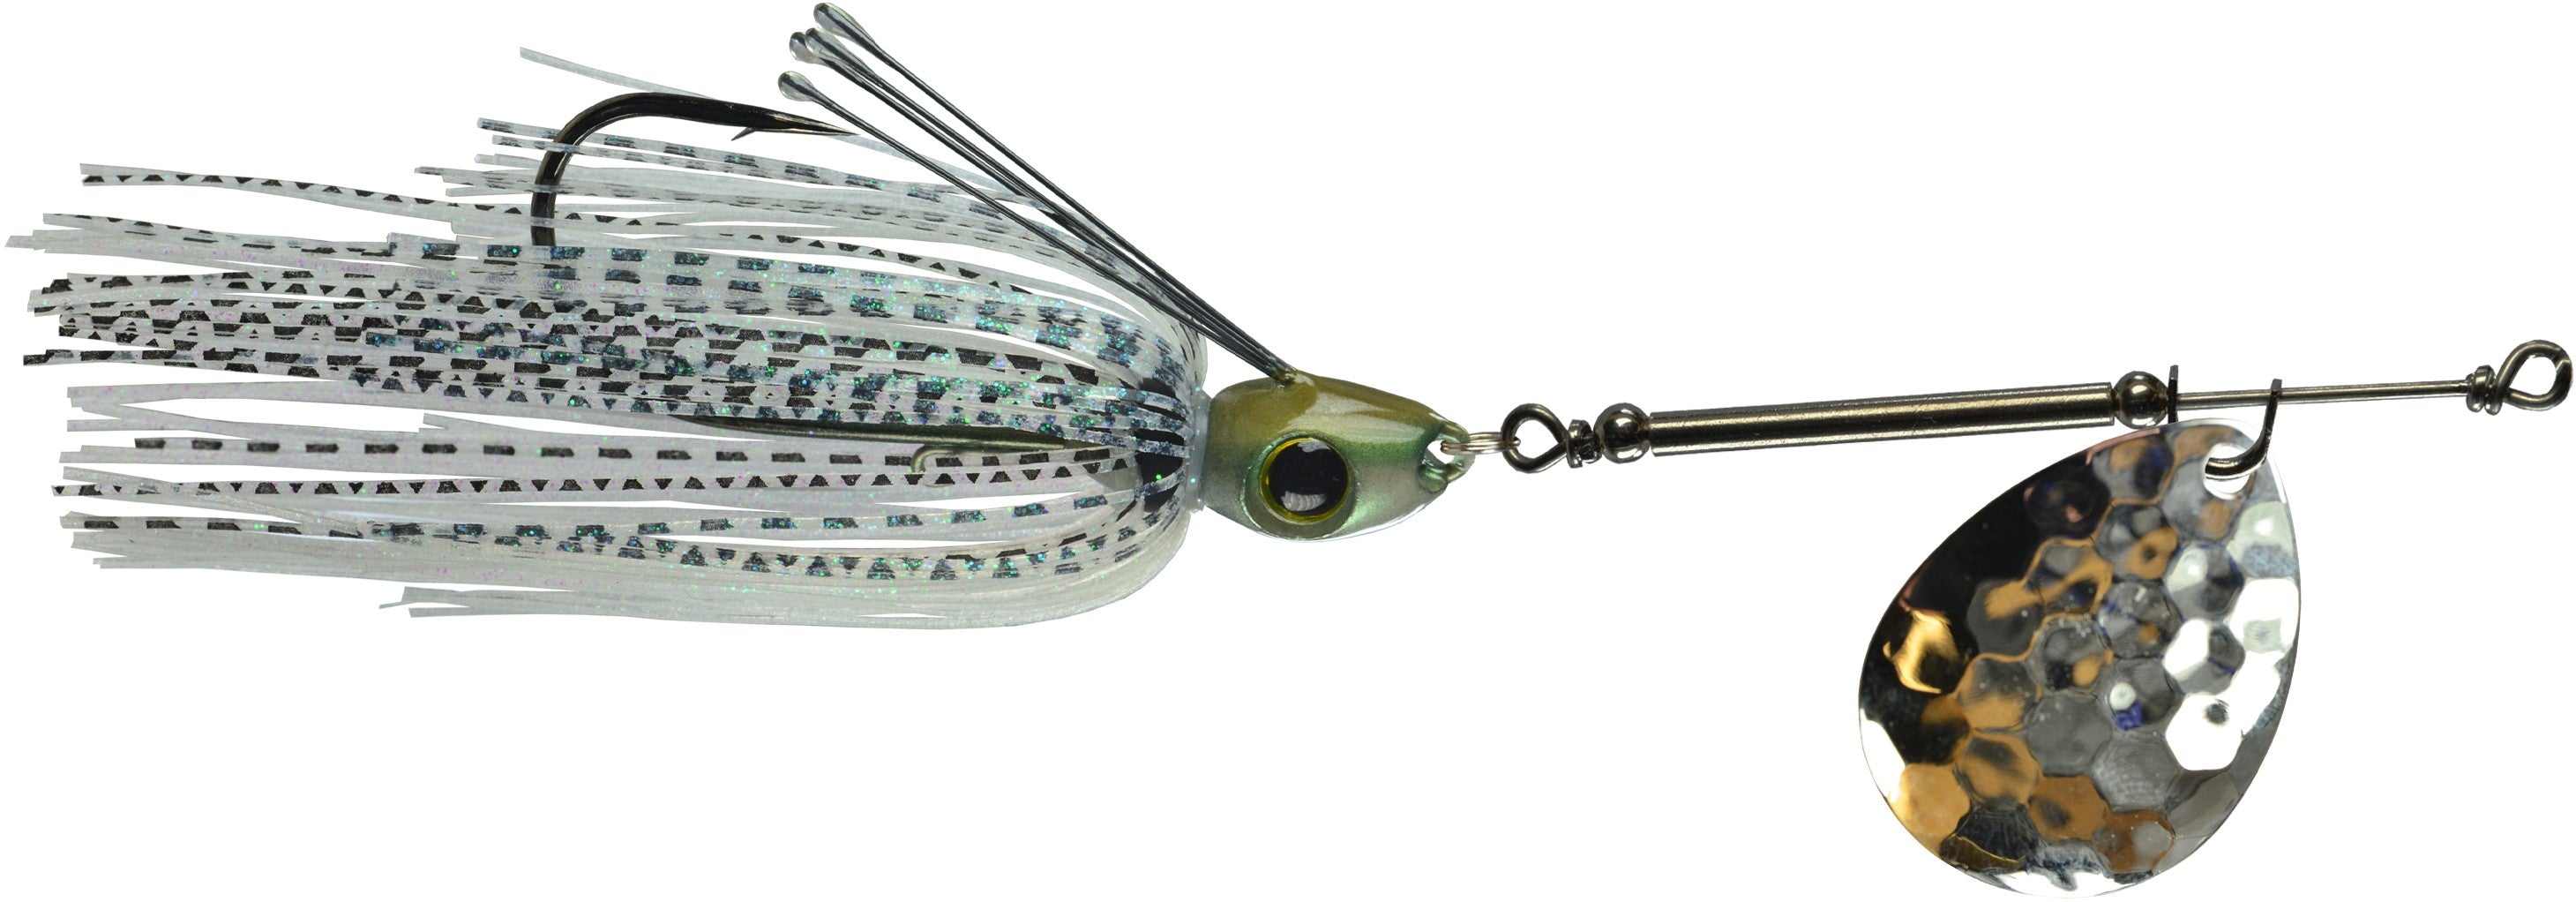 Cheap Spinner Bait Chatter Bait Weedless Fishing Lure Buzzbait